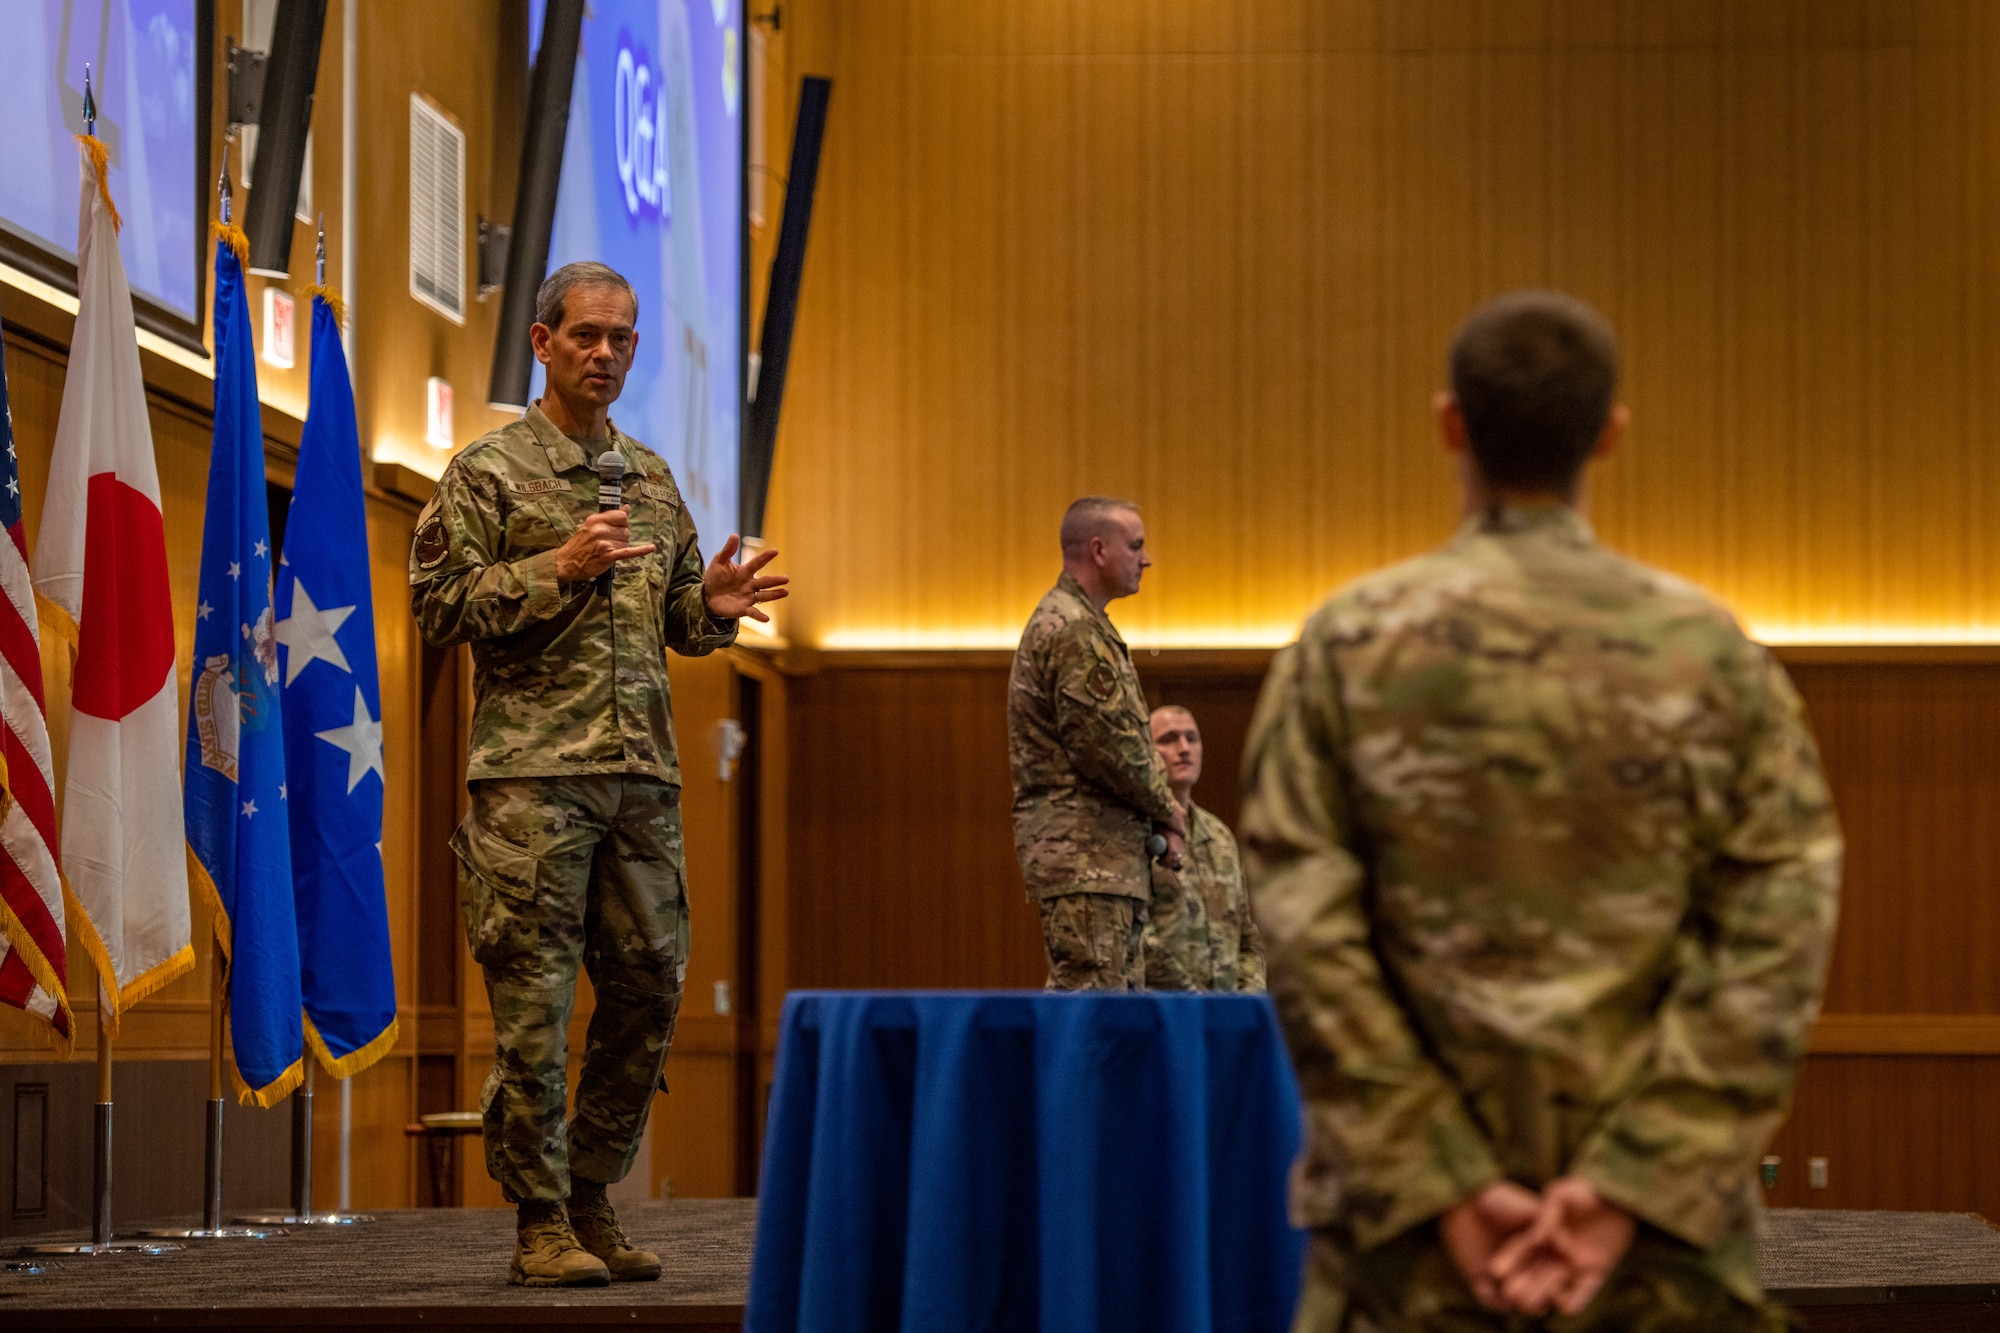 A General responds to an Airman who posed a question during his talk